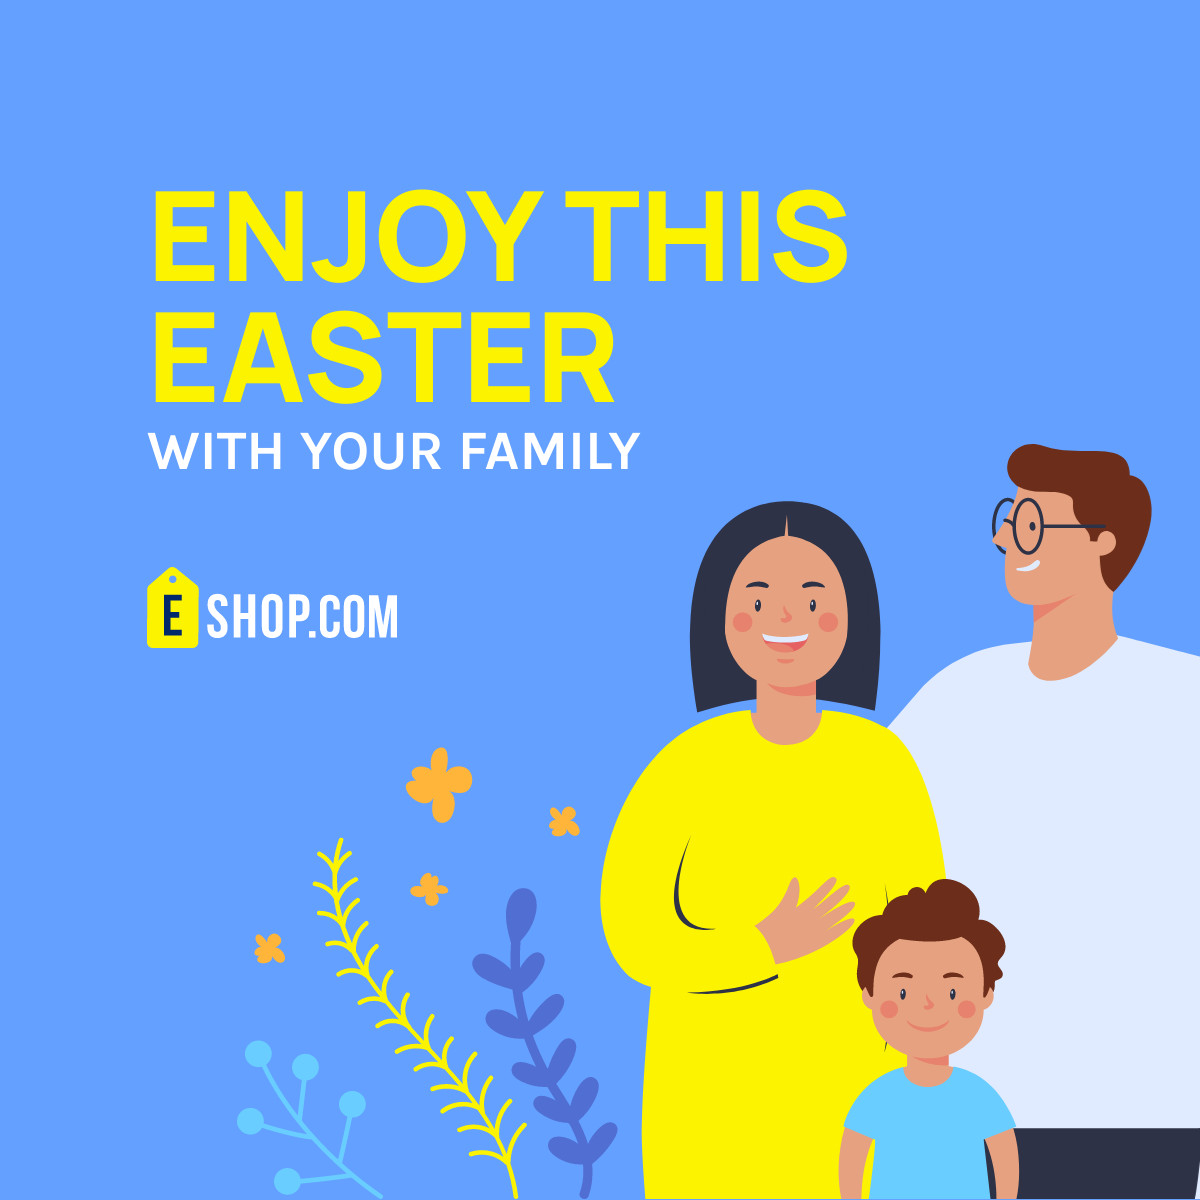 Enjoy Easter with Family Easter Inline Rectangle 300x250